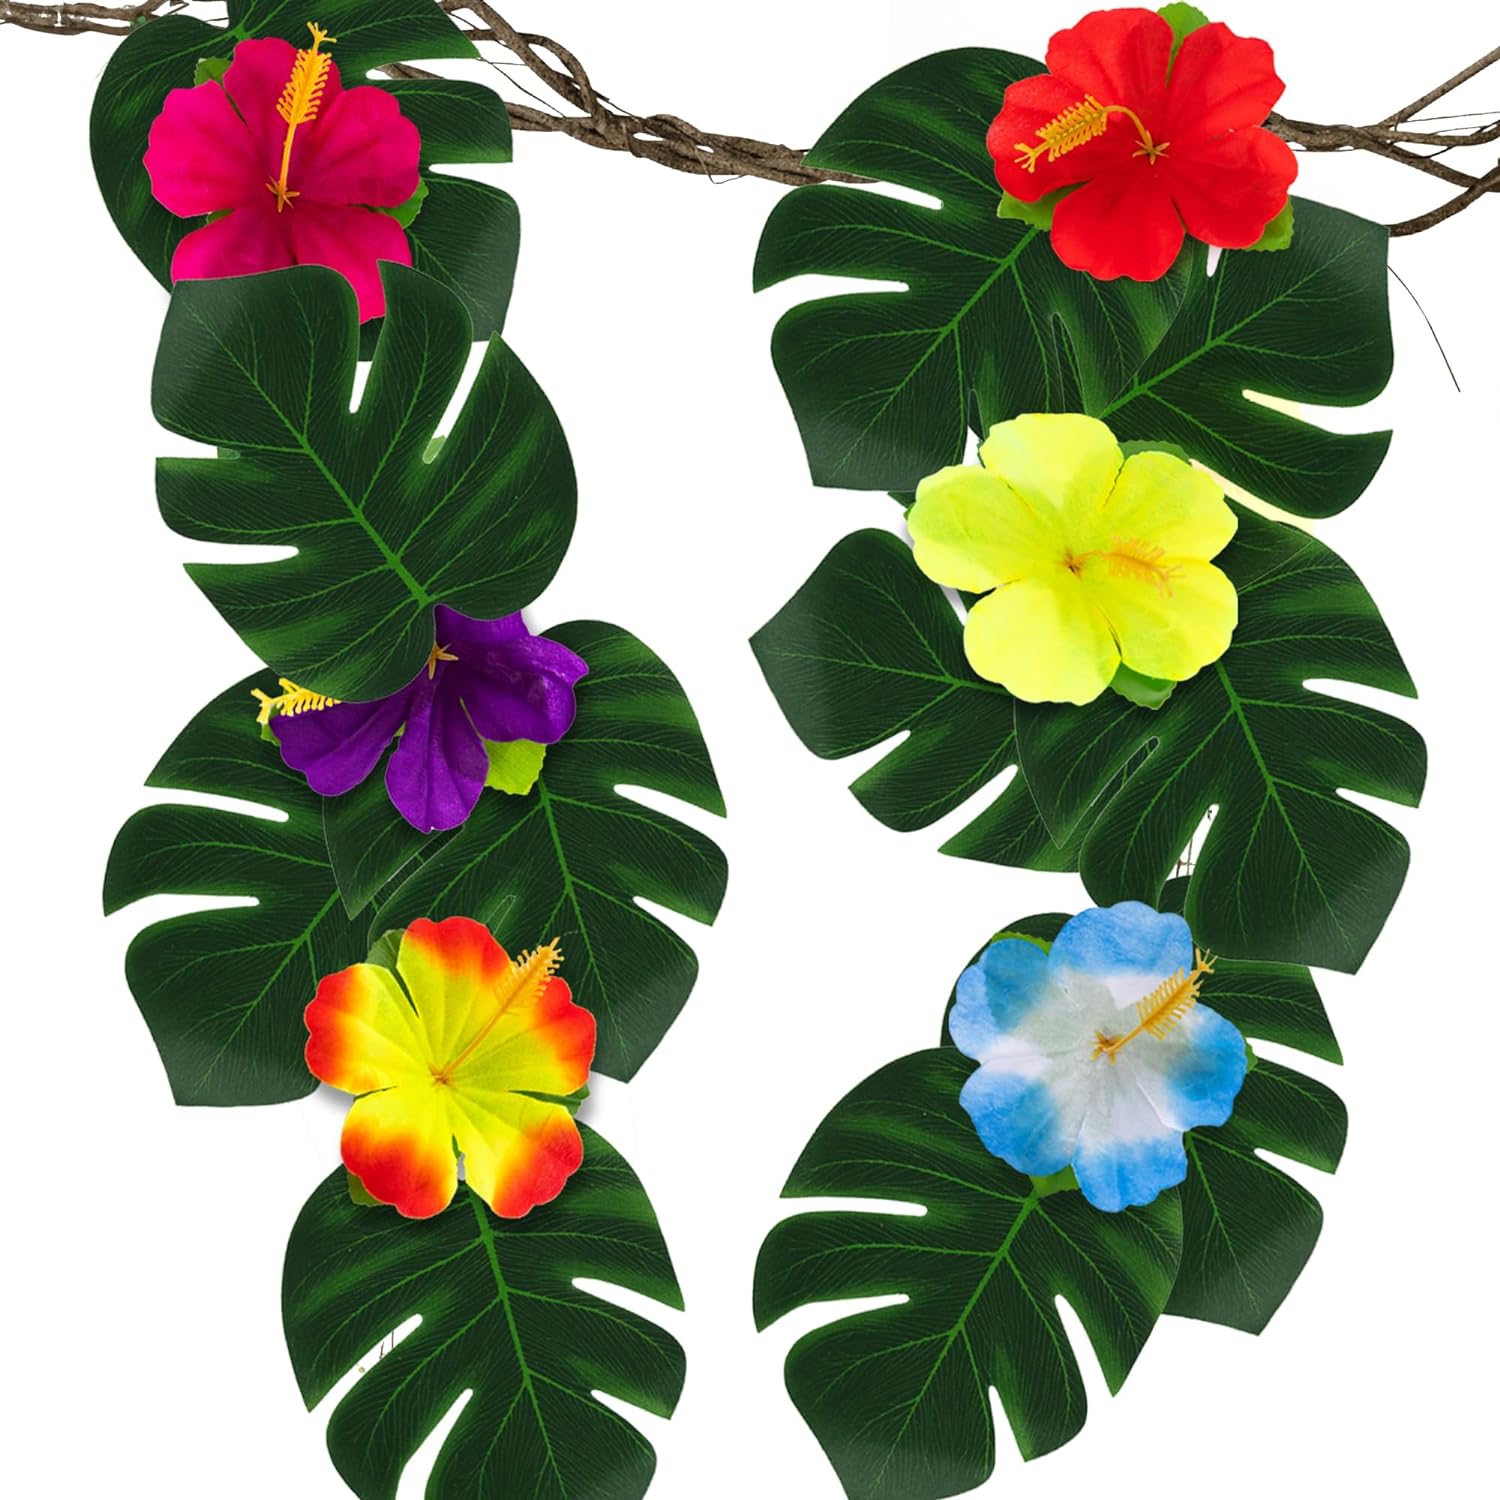 ArtCreativity Hawaiian Flower Luau Decorations - 60-PC Set with 36 Palm Leaves and 24 Artificial Hibiscus Flowers - Tropical Party Decor and Accessories for Birthday Party - Flower Decorations